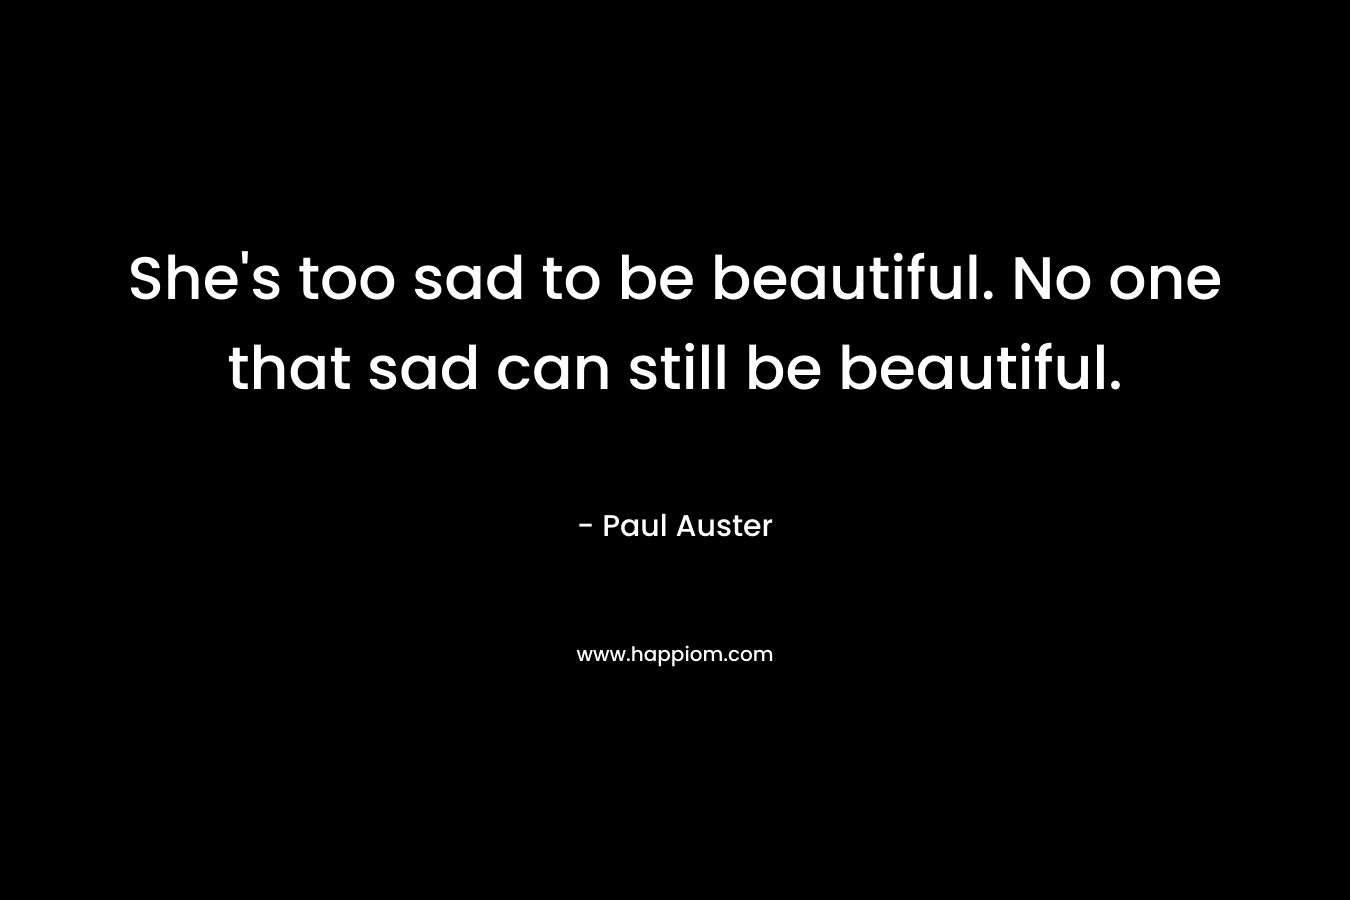 She's too sad to be beautiful. No one that sad can still be beautiful.